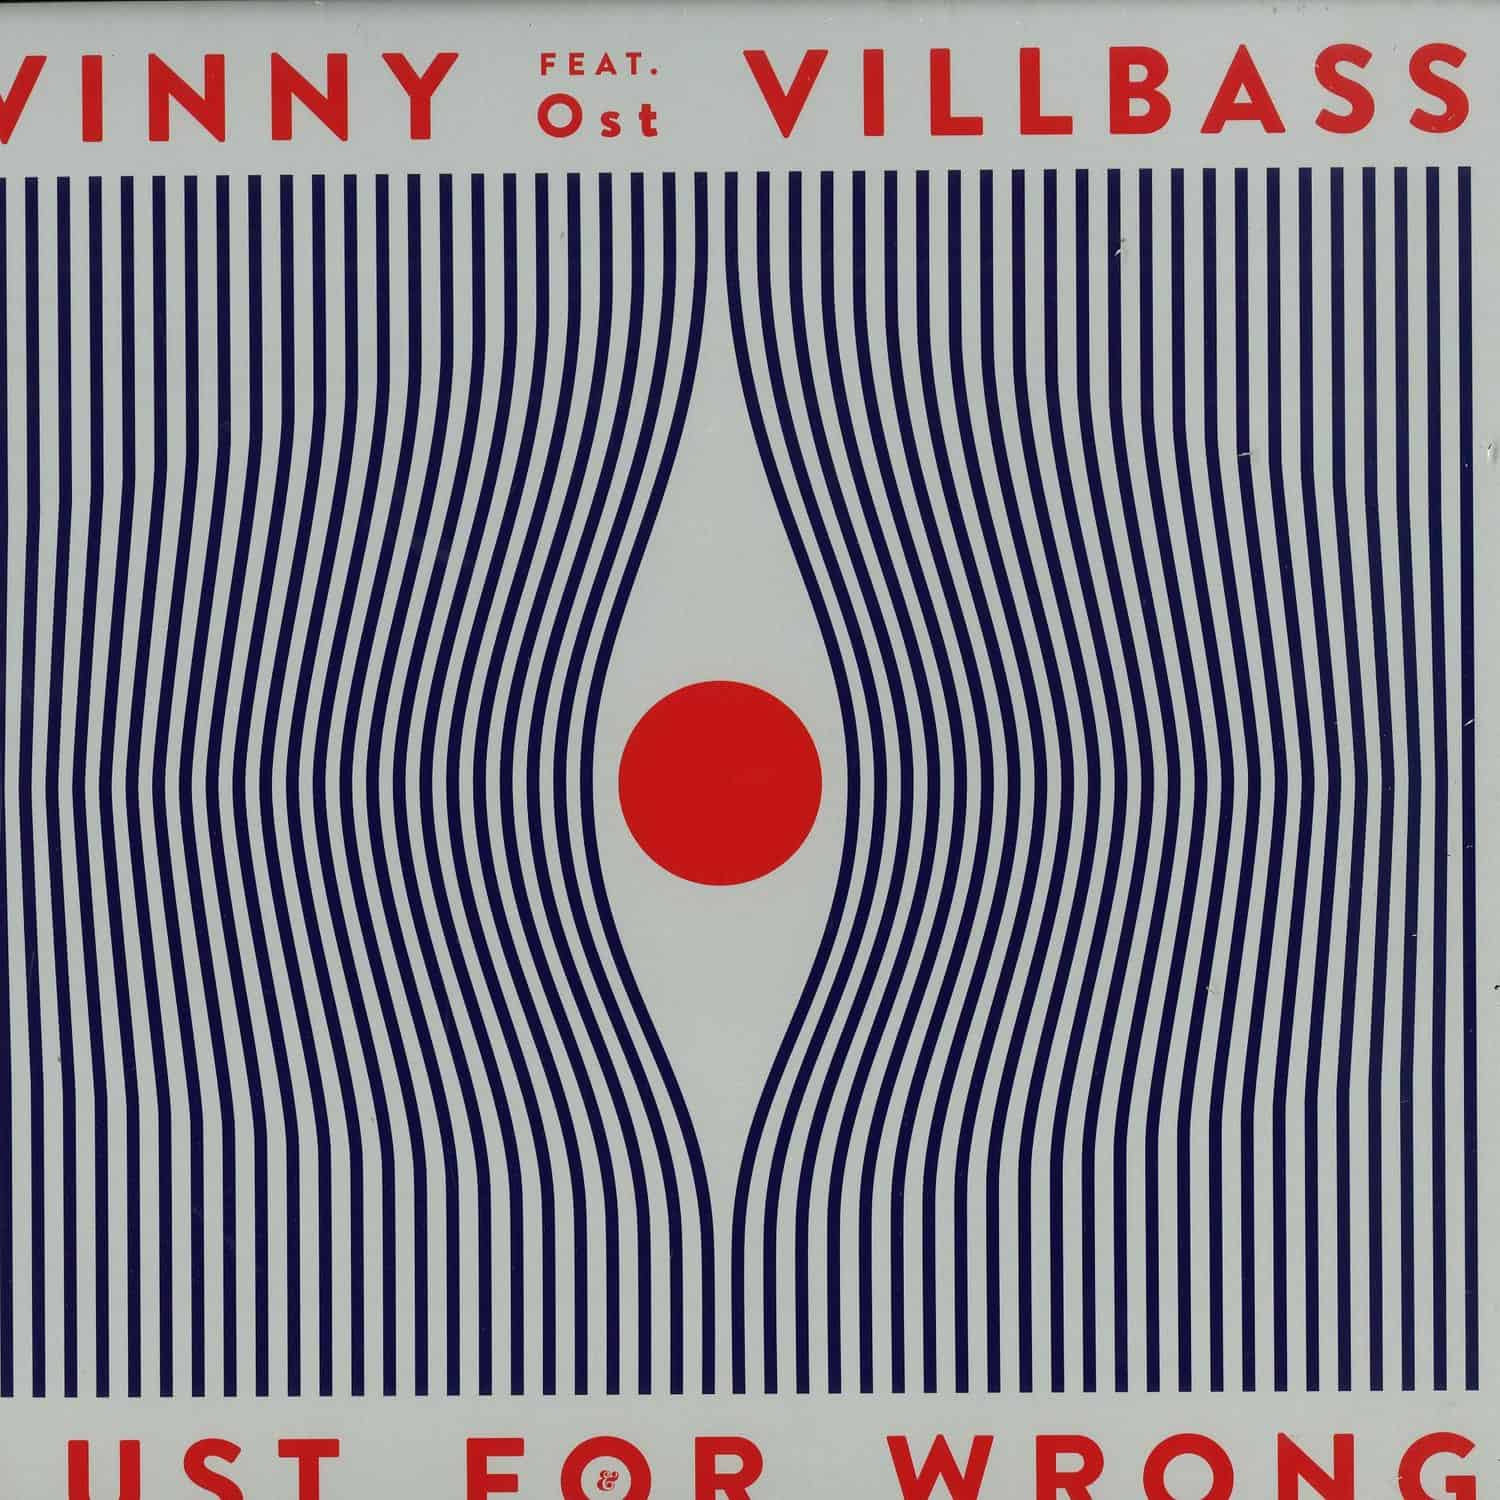 Vinny Villbass feat. Ost - LUST FOR WRONG 